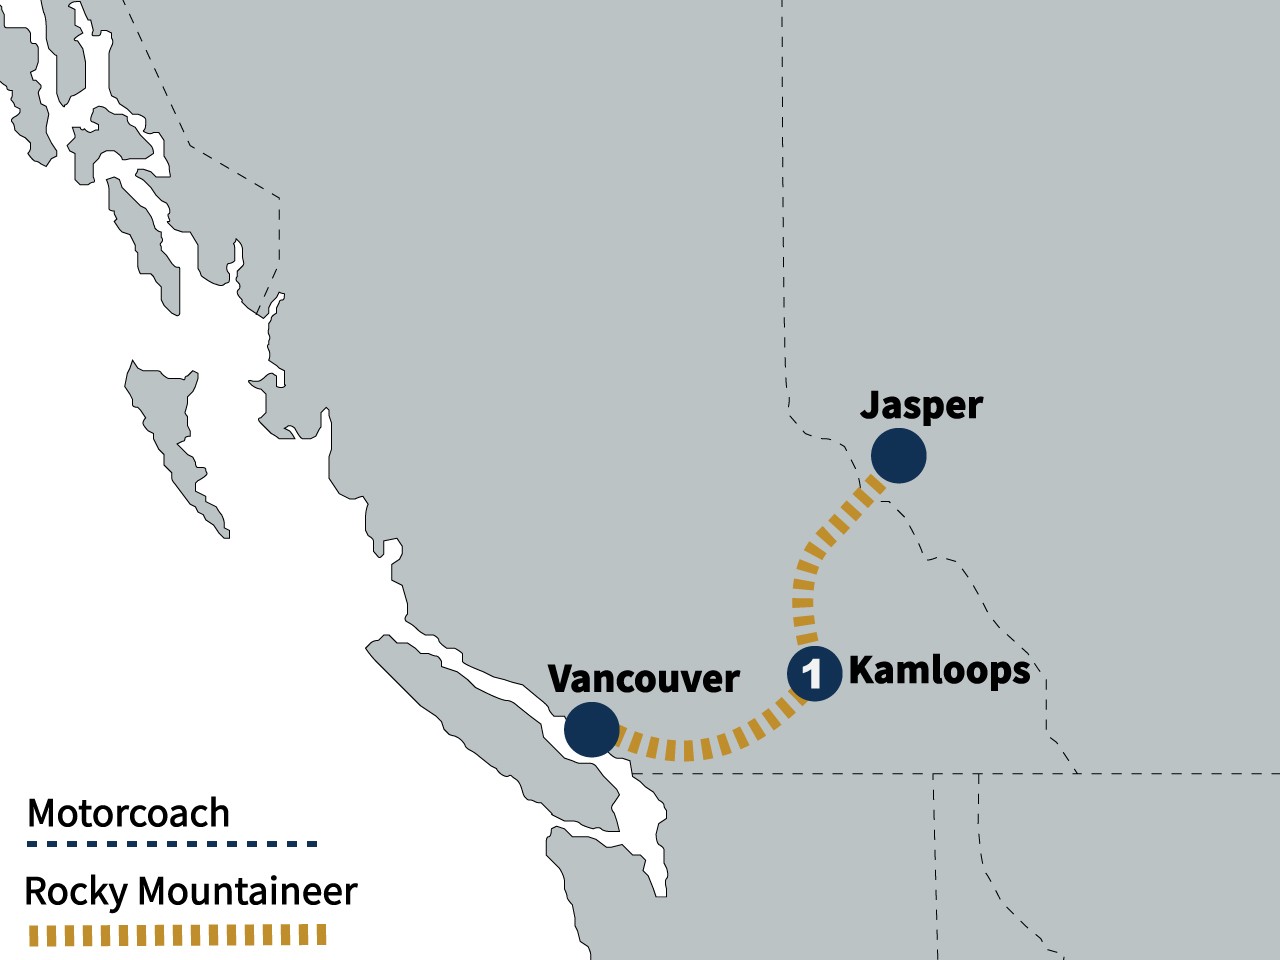 train route between Vancouver and Jasper